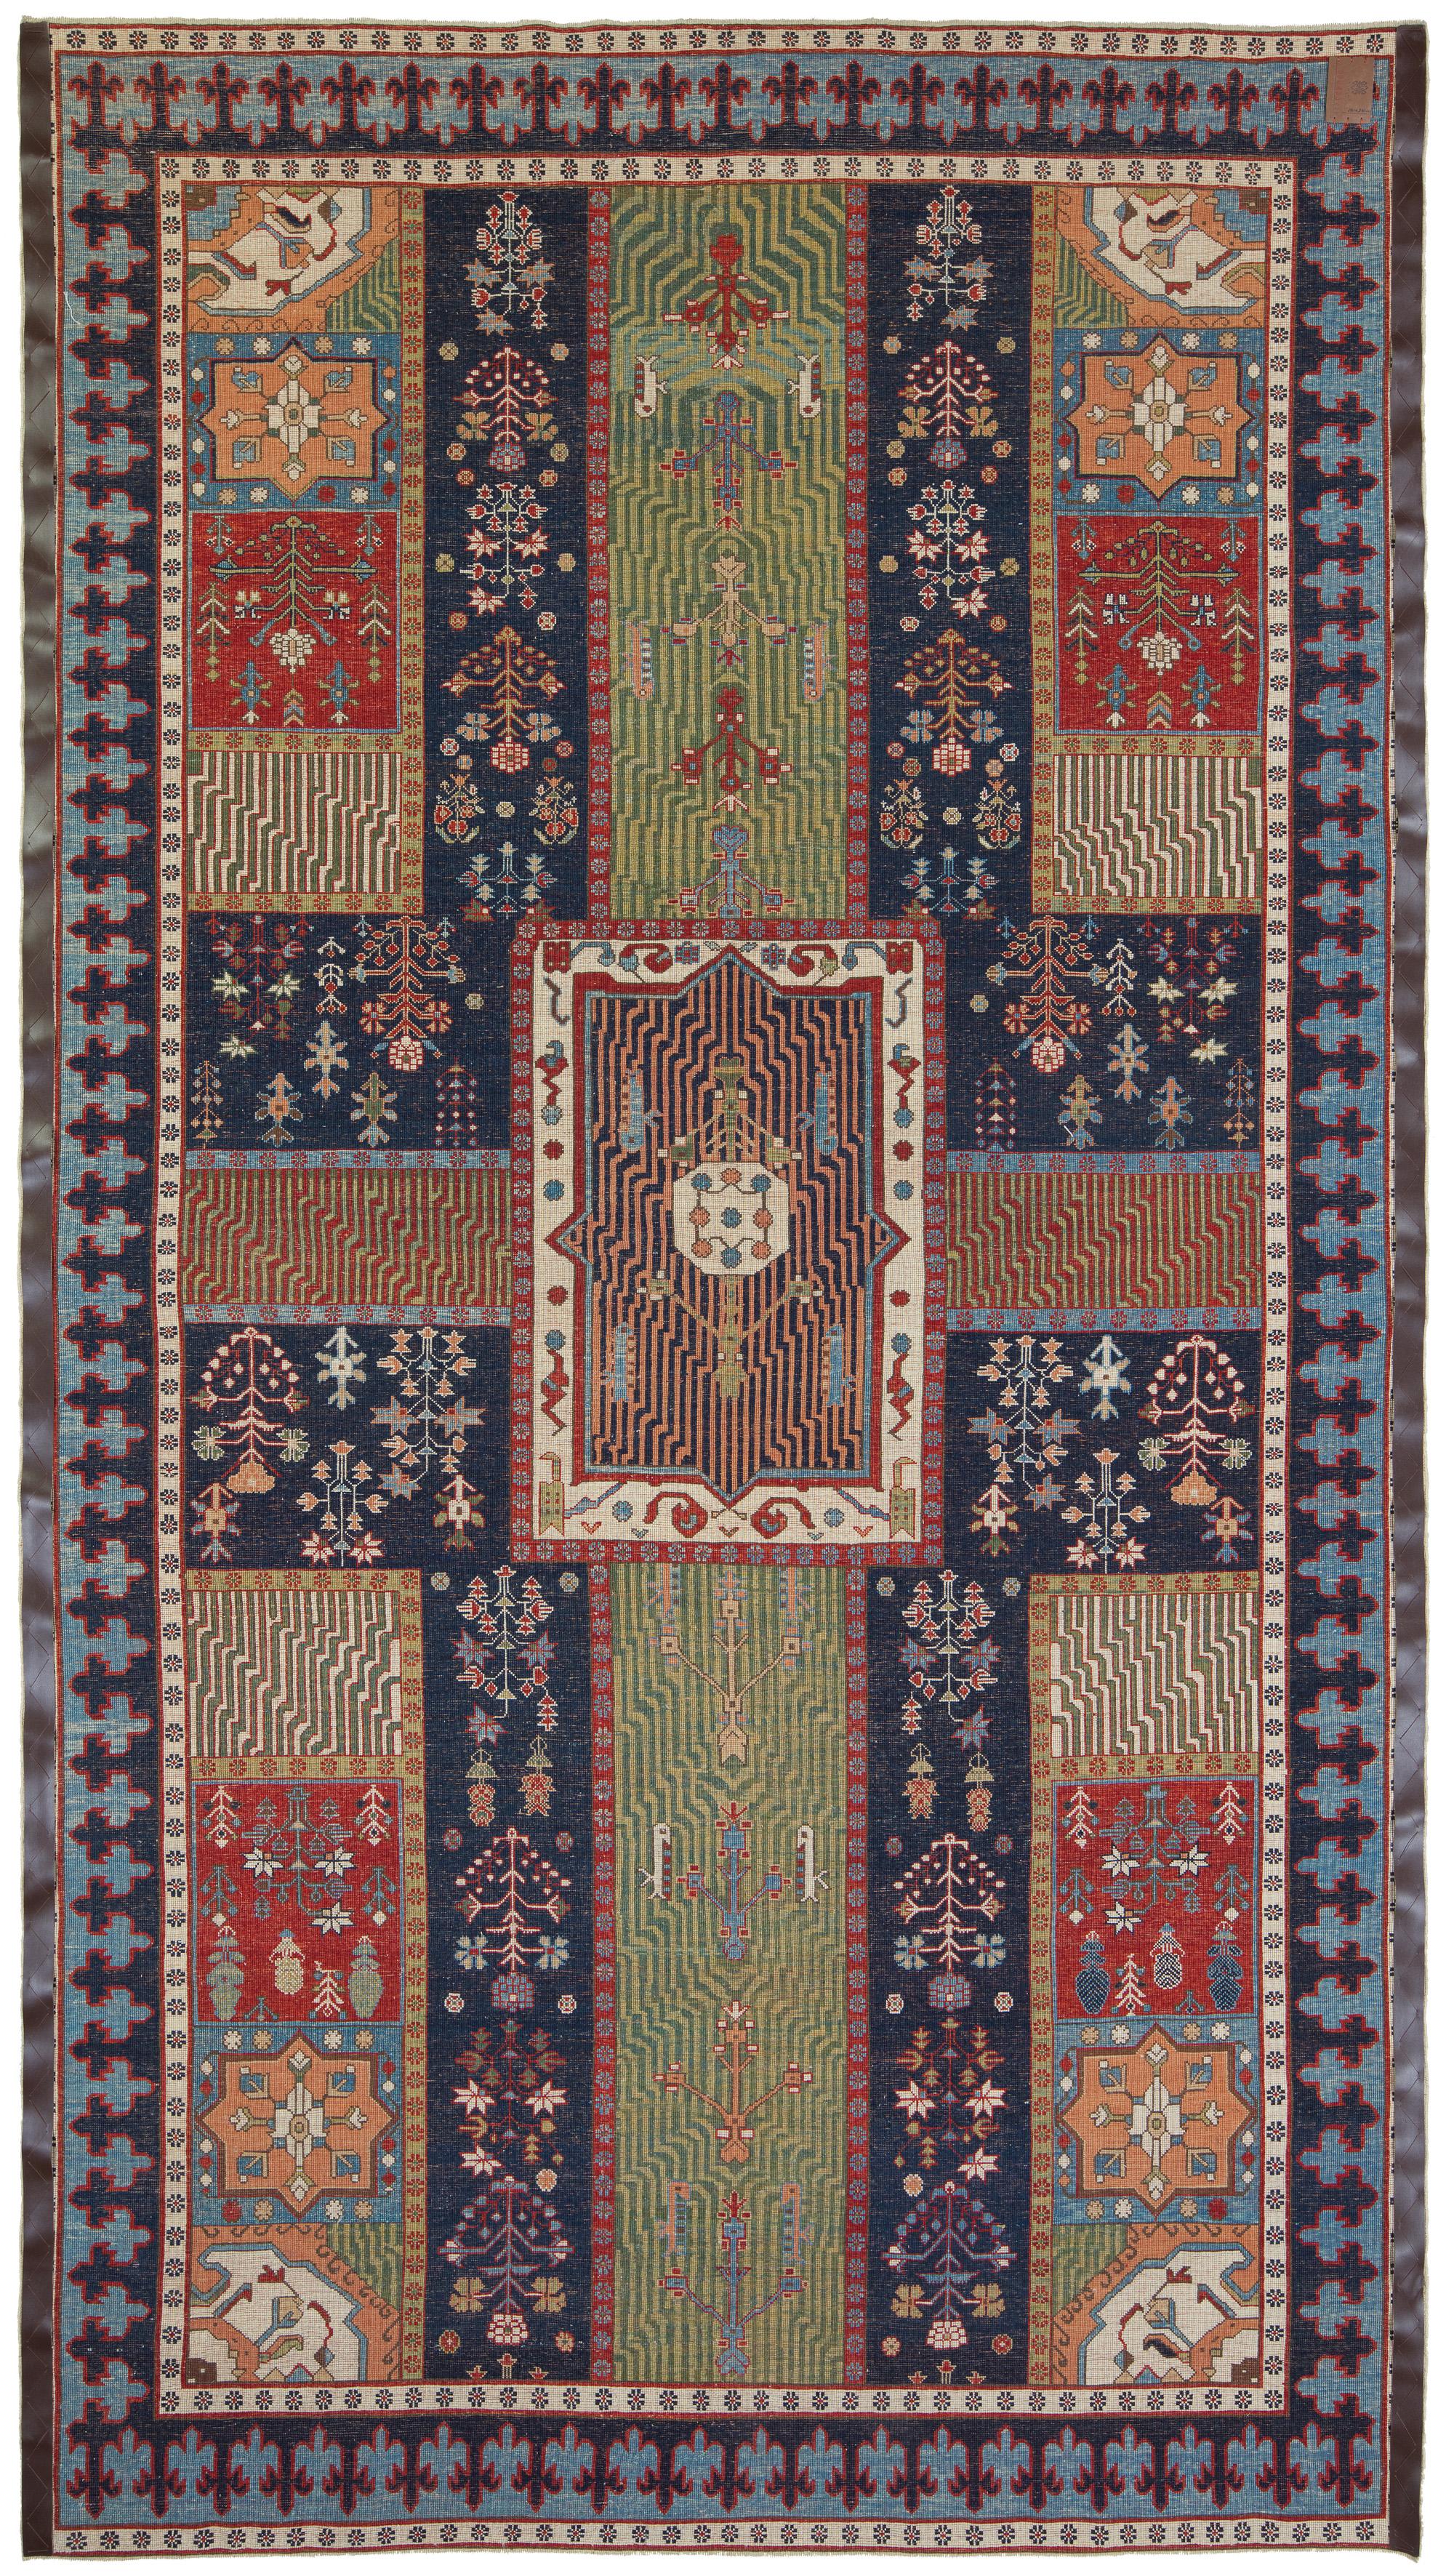 The source of the rug comes from the book Islamic Carpets, Joseph V. McMullan, Near Eastern Art Research Center Inc., New York 1965 nr.28. This Persian Garden design rug belongs to the second half of the 18th century in the Persia area. The design